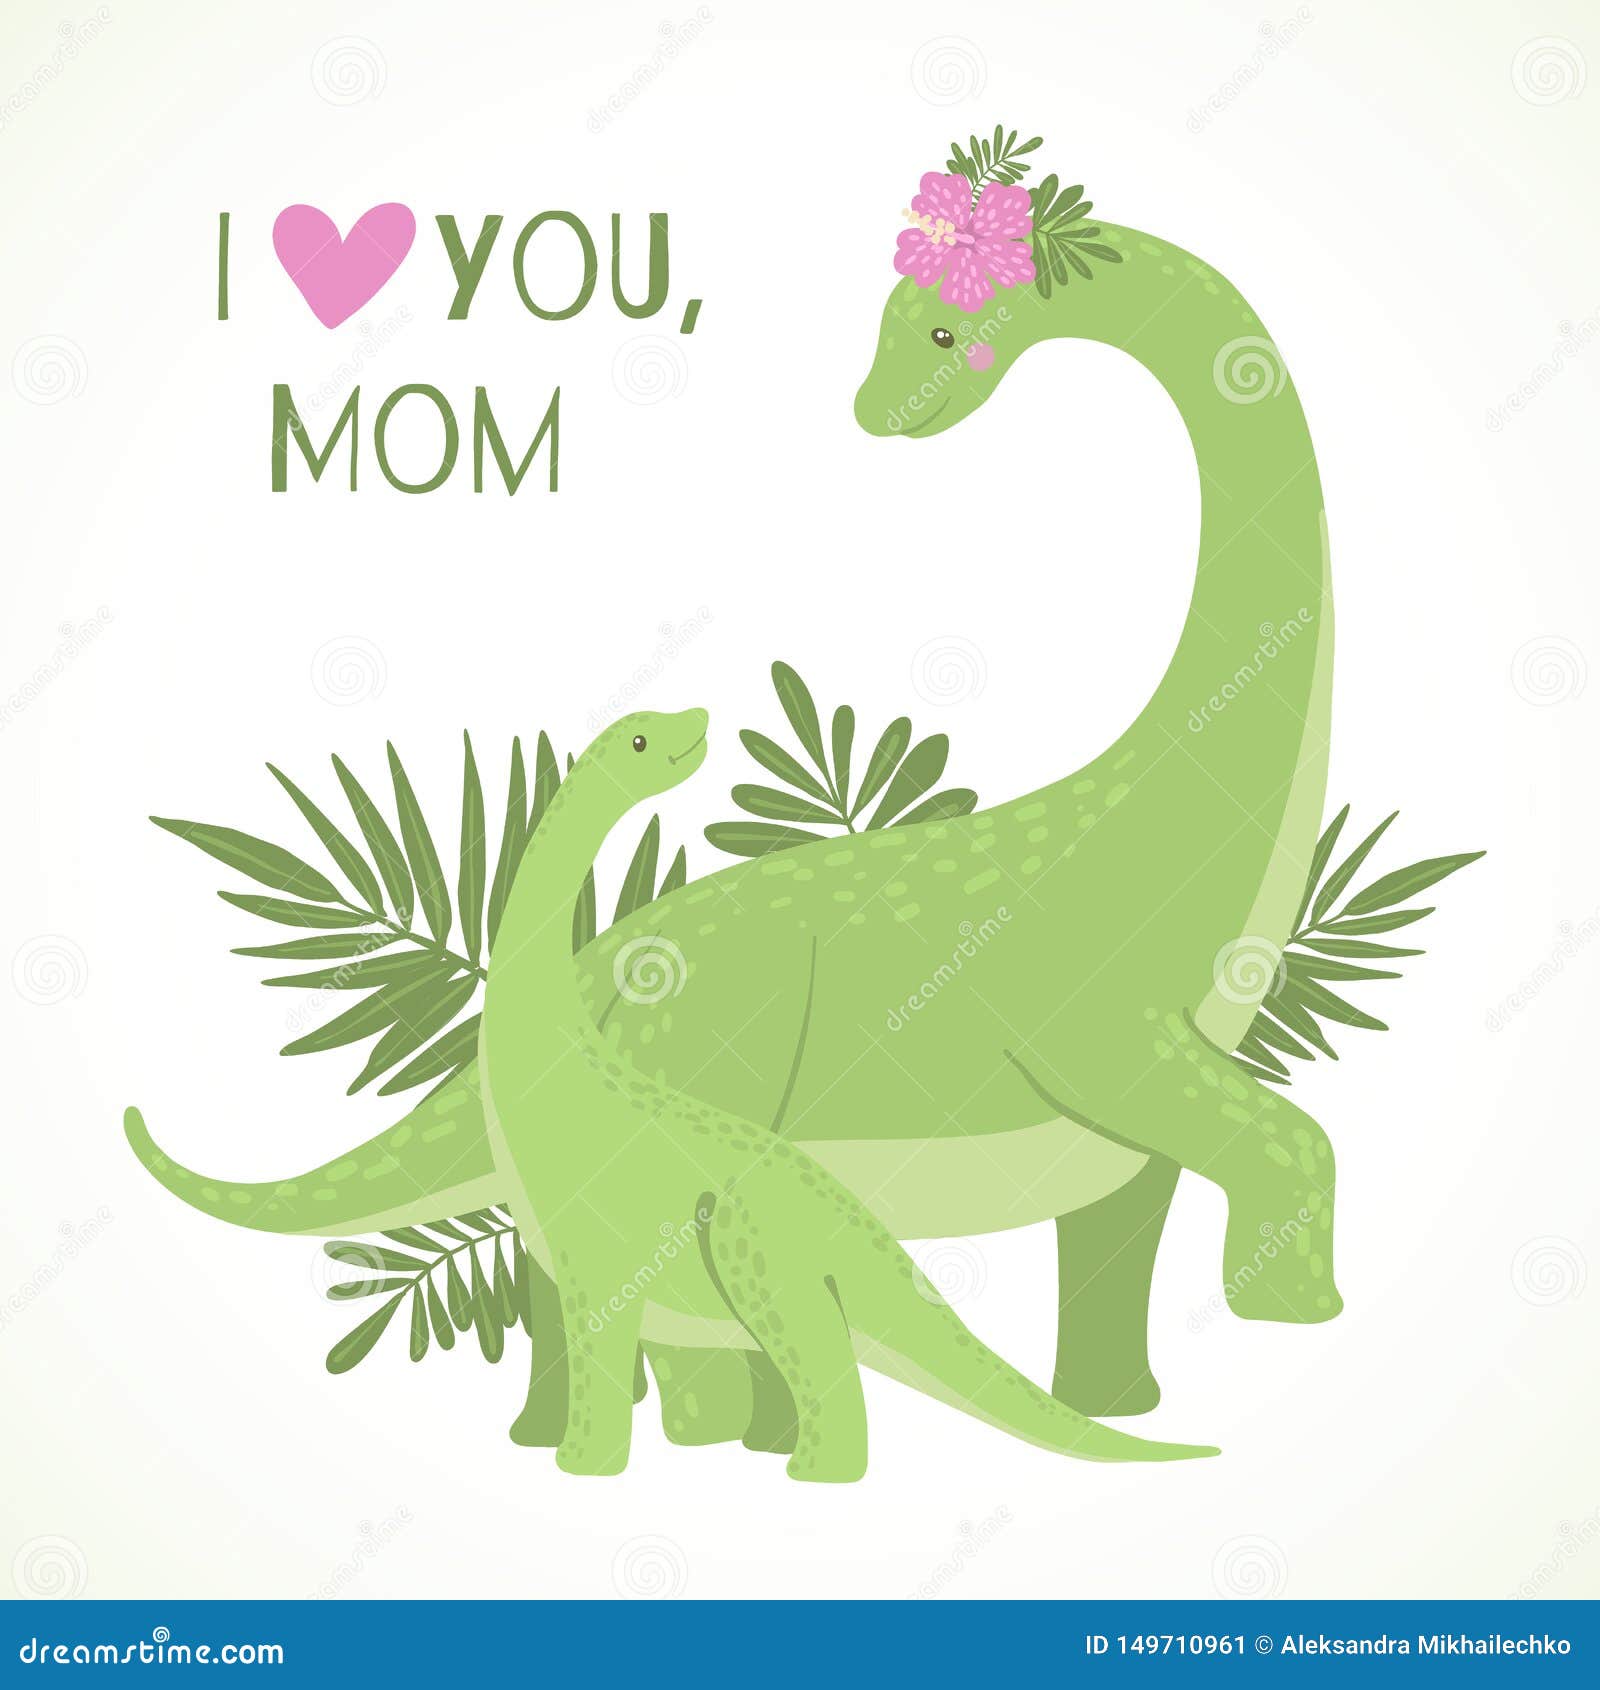 Download Cute Card With Mom And Baby Dinosaur Stock Vector ...